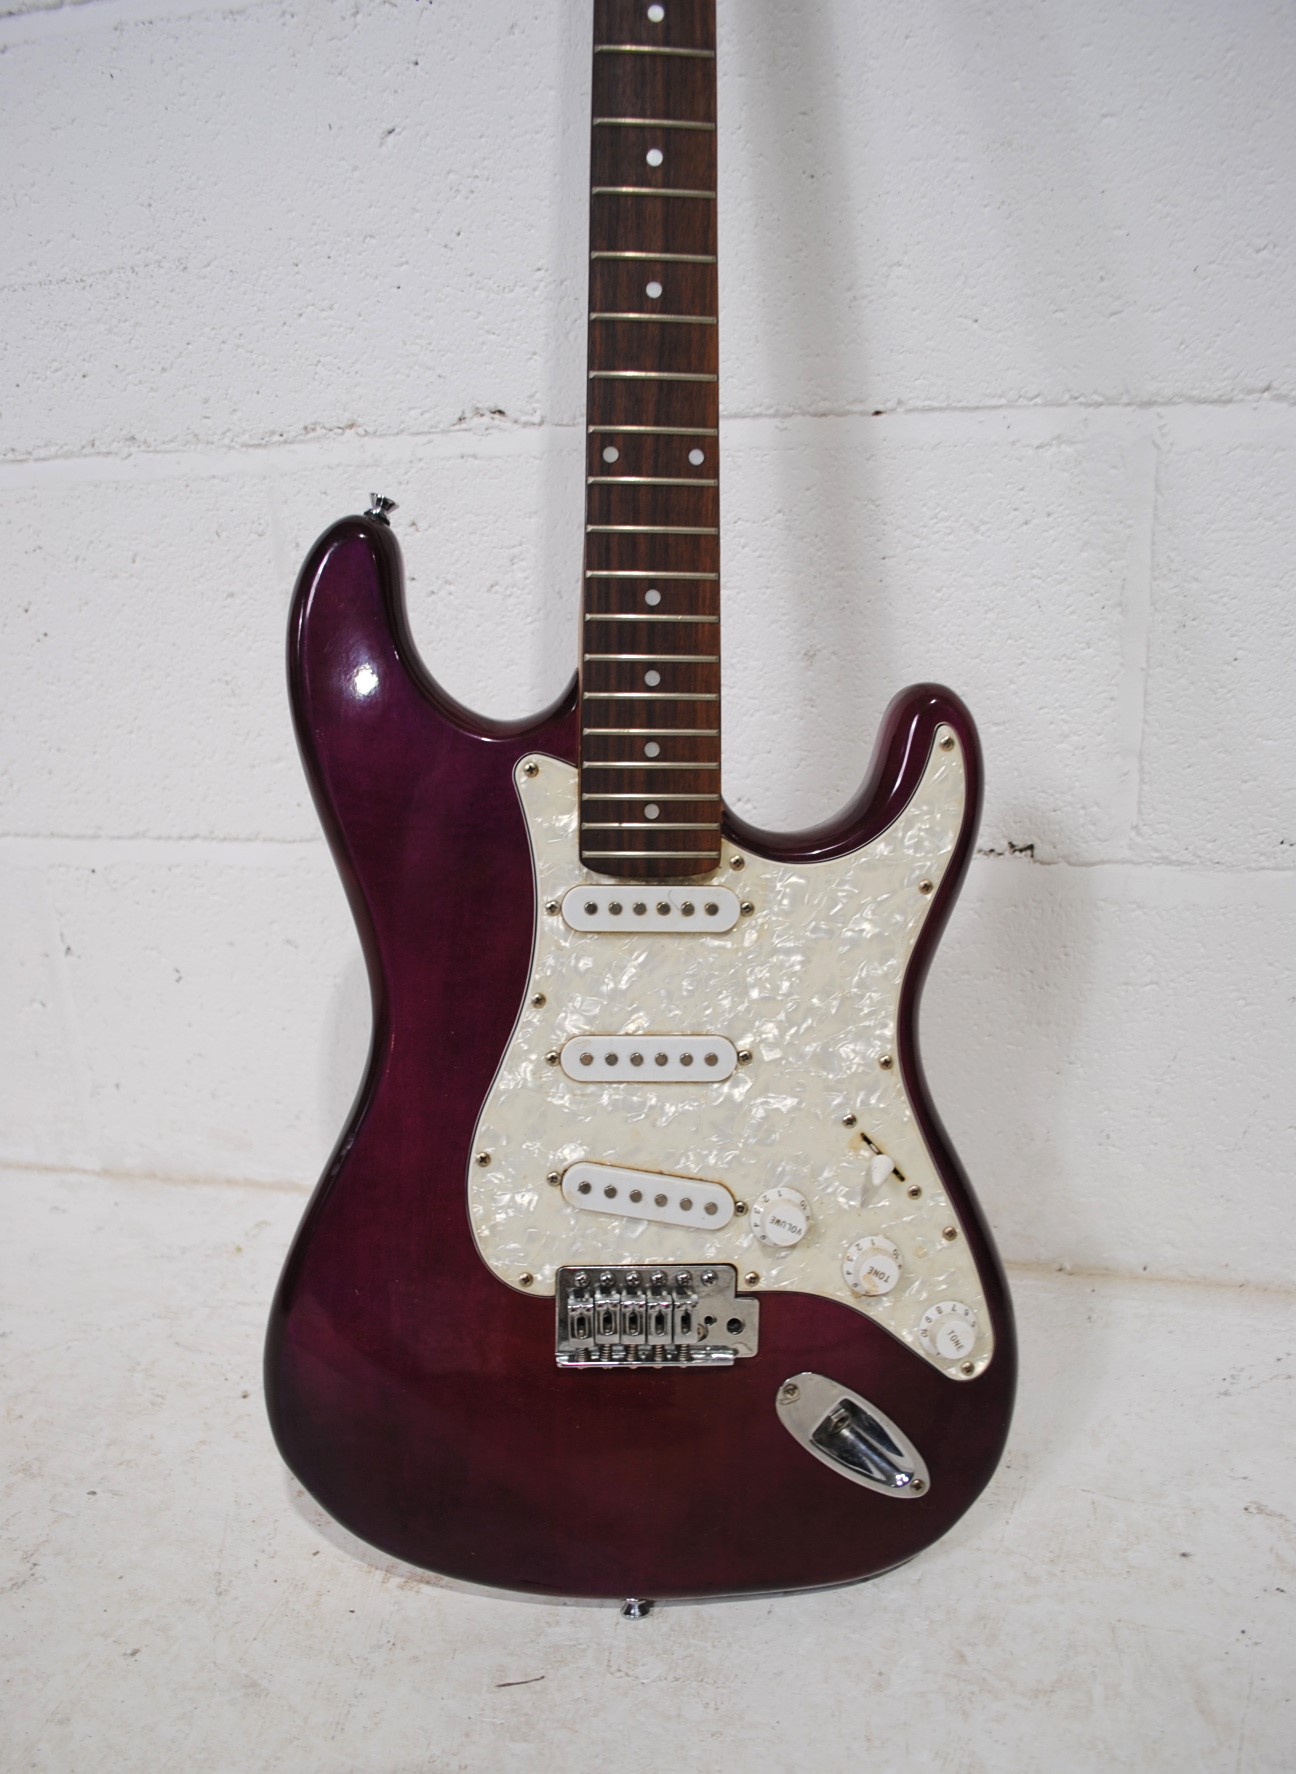 An Encore Stratocaster electric guitar - no strings - Image 4 of 8